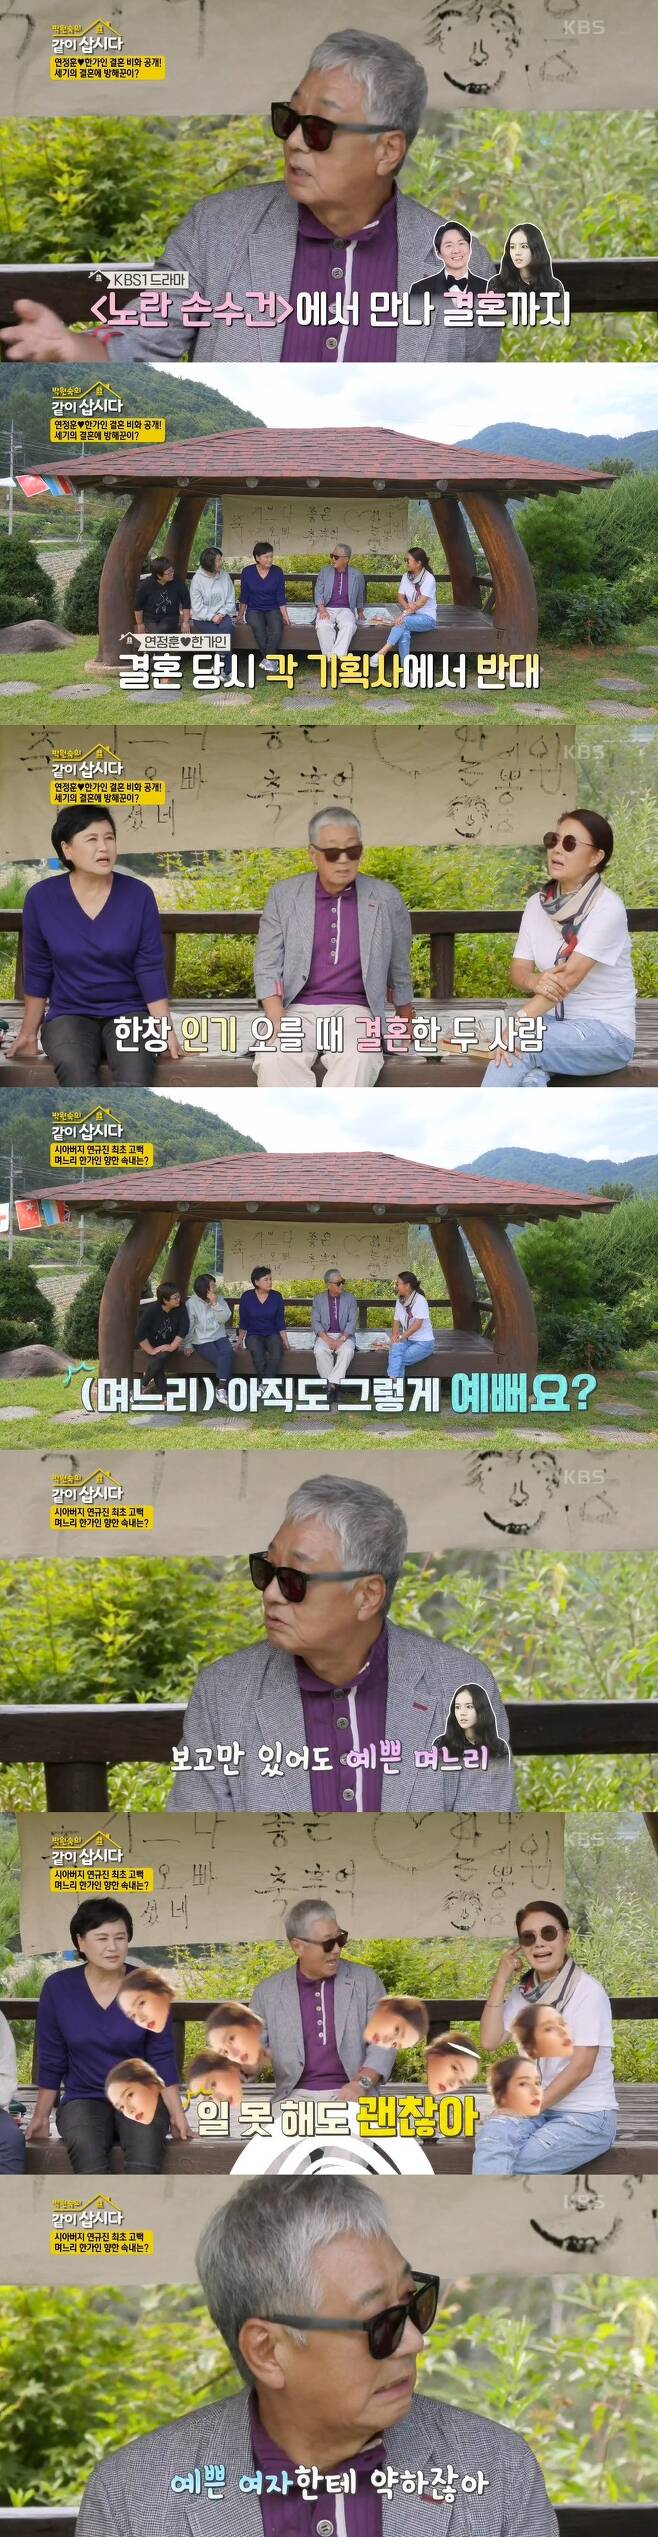 Seoul = = Park Won-sooks Sapsida Season 3 featured Yeon Kyu-jin, the father of actor Yeon Jung-hoon and the father-in-law of Han Ga-in, and told the family story.In KBS 2TV Park Won-sooks Sapsida Season 3 broadcasted on the last three days, Yeon Kyu-jin visited Park Won-sook, Hye Eun Yi, Kim Young-ran and Kim Chung to talk.Park Won-sook said, I knew it was a wonderful person, but Daughter-in-law got well, and So did Son, and Yeon Kyu-jins plan is enormous.I have not planned anything, said Yeon Gyu-ji. We have followed it as they do, and there is no relationship between them and me, and they are both blind and marriage.Yeon Kyu-jin said, When the two marriage, each agency opened the goal and the goal was hurt, when the stock price was good. But it seemed better because it marriage. There was no one who had an open position, he said.I built a big house because I was a little overworked because I wanted to live with us (when I was newly married), but I lived for 5 ~ 6 years and said that they were going out, and they had good hair, Yeon said with a laugh.Park Won-sook also said, I think the child is wise, and Yeon Kyu-jin confessed, As soon as I marriage, my child (Yeon Jung-hoon) went to the army.Its a good thing to go into a house without a groom and live, Hye Eun Yi said.Hye Eun Yi recalled, In an interview program, Daughter-in-law first wanted to live with his parents, and if he lived to some extent, he wanted to live out.Kim Chung said, Is it still so pretty (Daughter-in-law)?And Yeon Kyu-jin said, Its beautiful even if you look at it, but I can not work. He laughed and said, I am weak to a pretty woman. I have two grandchildren, he said, adding, I have a daughter on top and a son on the bottom, who are six and three years old respectively.He smiled at his grandchildren and said, I want to see it if I do not see it, but it is hard after half a day.Park Won-sook then hit back: My grandchild is so pretty when he comes and more pretty when he goes.Kim Chung asked Yeon Kyu-jin, Do you still drive the car? Yeon Kyu-jin replied, I changed it often because I like the car.Kim Chung said, I will be good. I like cars so I can change each other. However, Yeon Kyu-jin added, I can not even open his car door.Since then, they have eaten together. Hye Eun Yi has been fortunate to Yeon Kyu-jin, Is a man living with a good food woman happy? Kim Chung said, Do you like a pretty woman?Do you like a woman who is good at food? Yeon Kyu-jin said, Its a really difficult question. Both of them.I dont know, my wife seems to have no expressive power, he said of his wife, like (Kim) Cheong, Im not pretty?